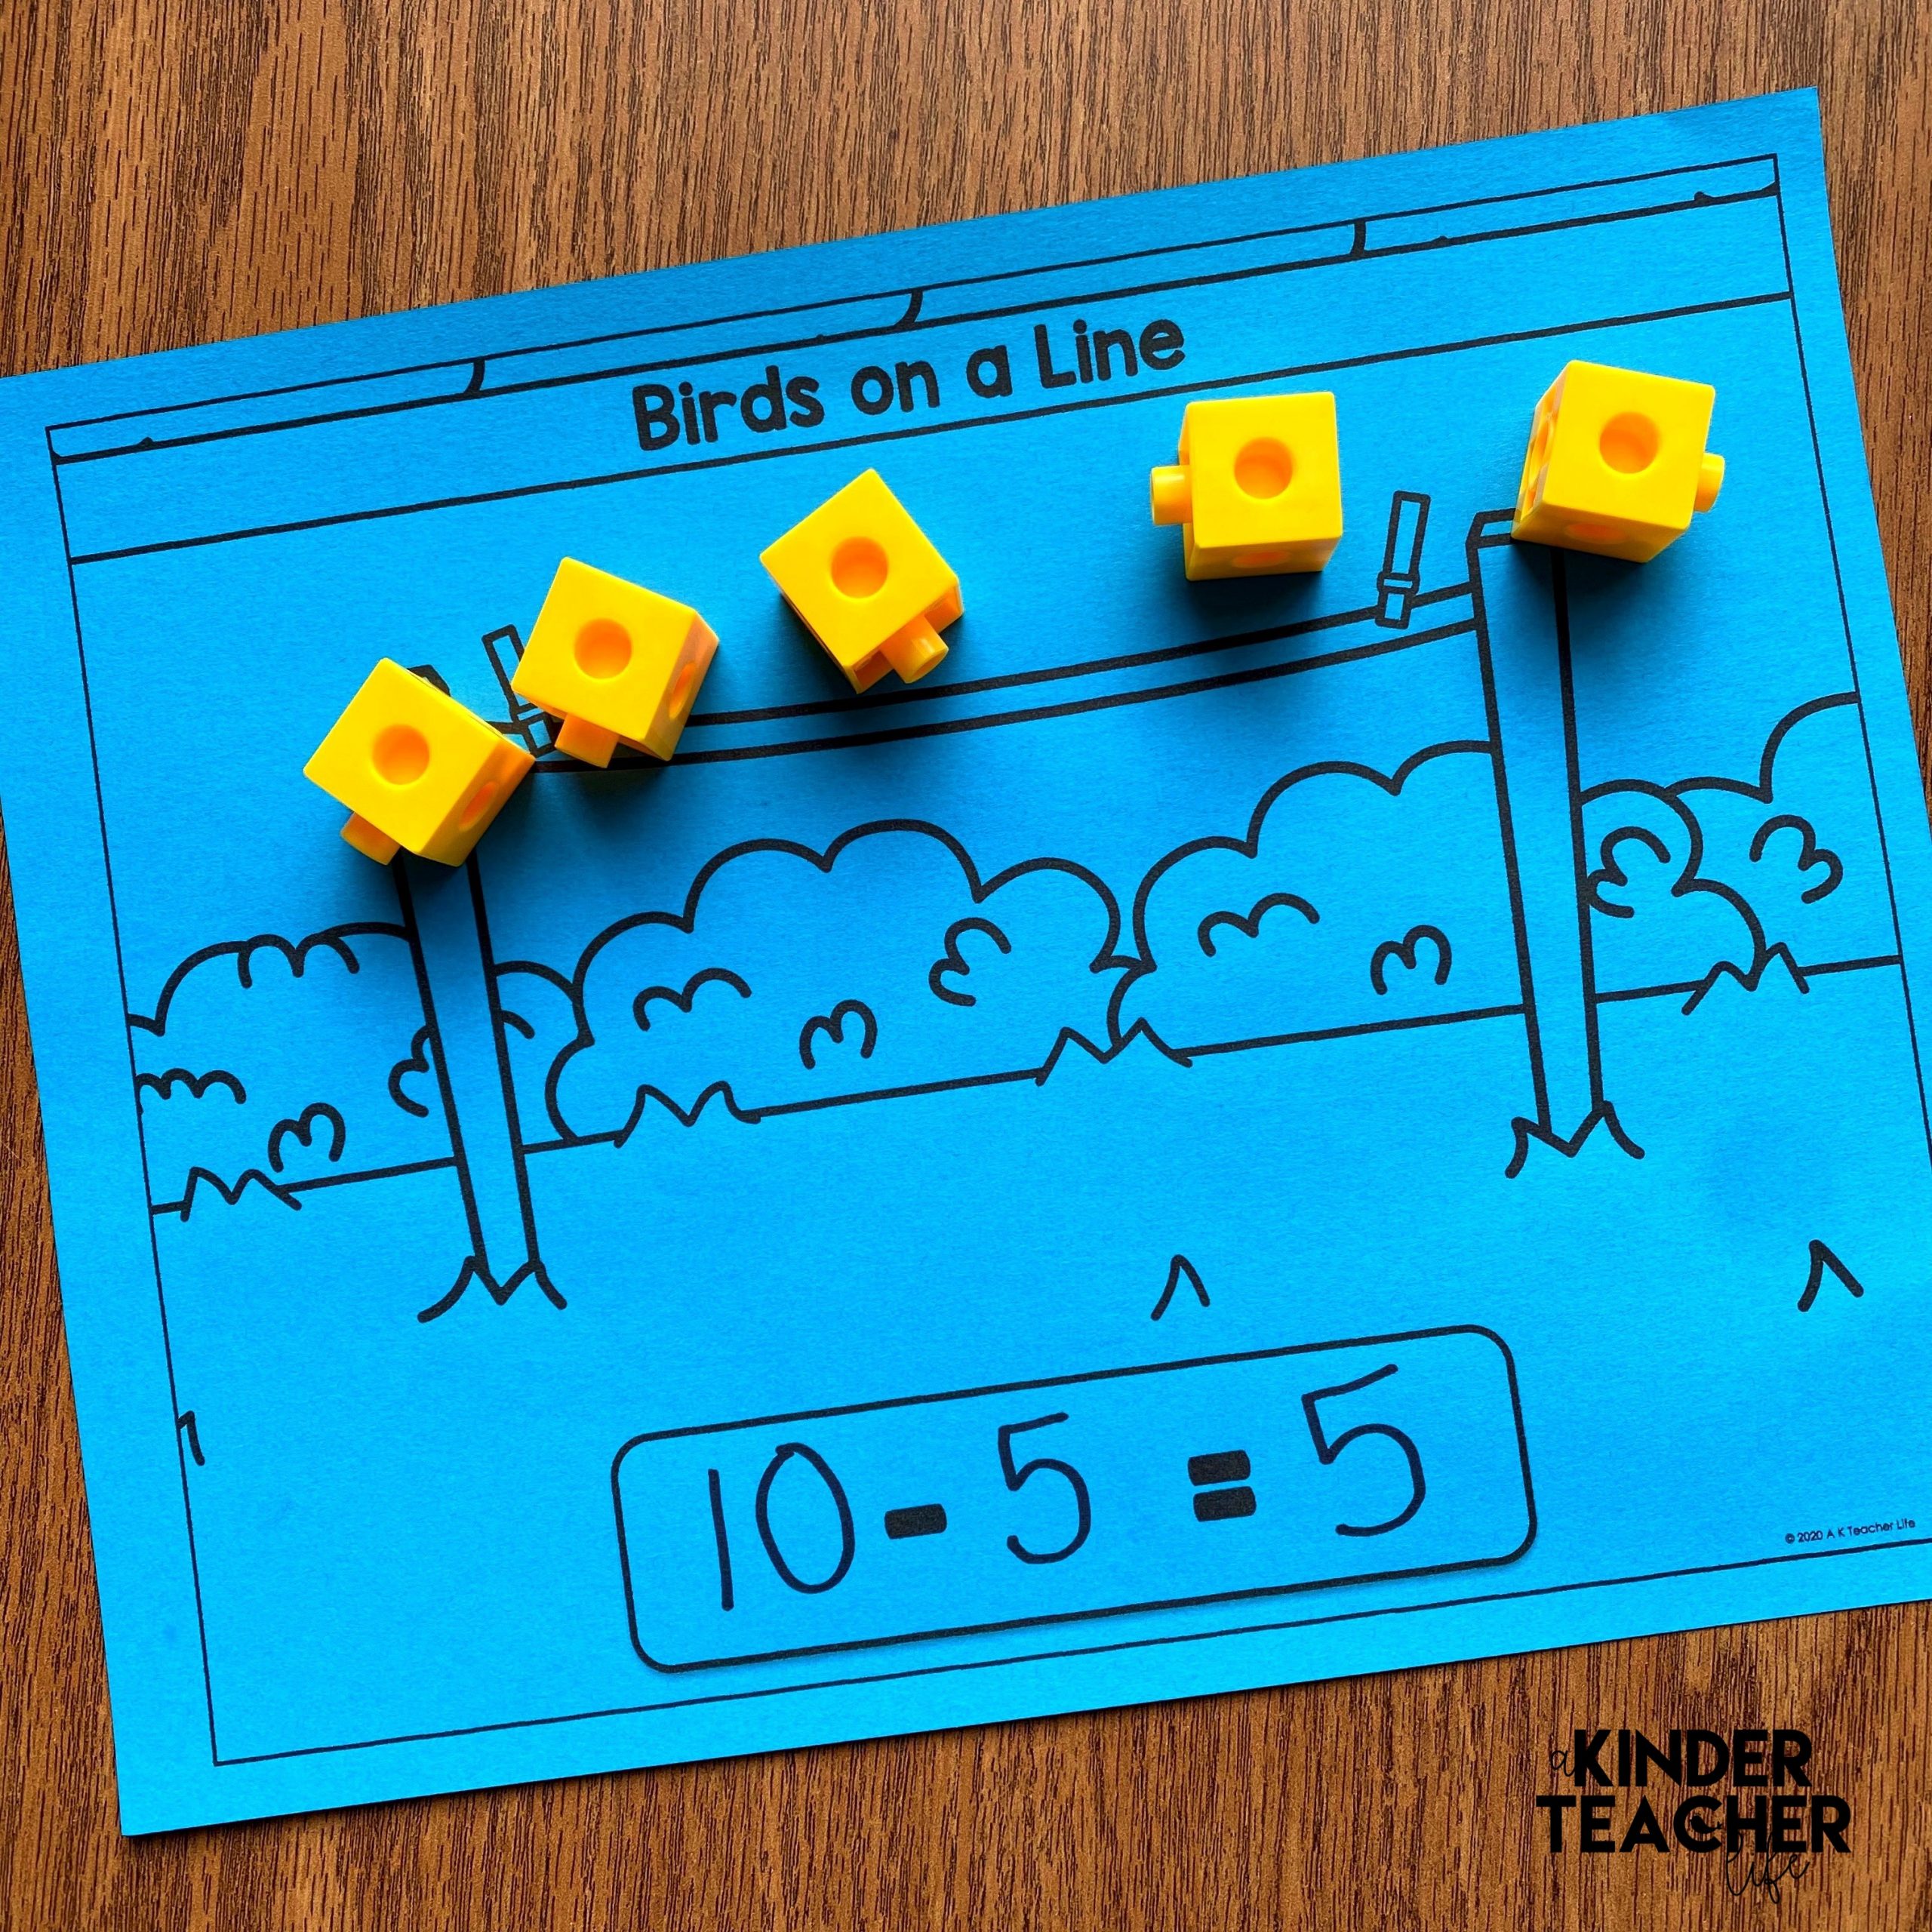 Subtraction activity for kindergarten - students listen to the word problem and act out the story using small objects. 